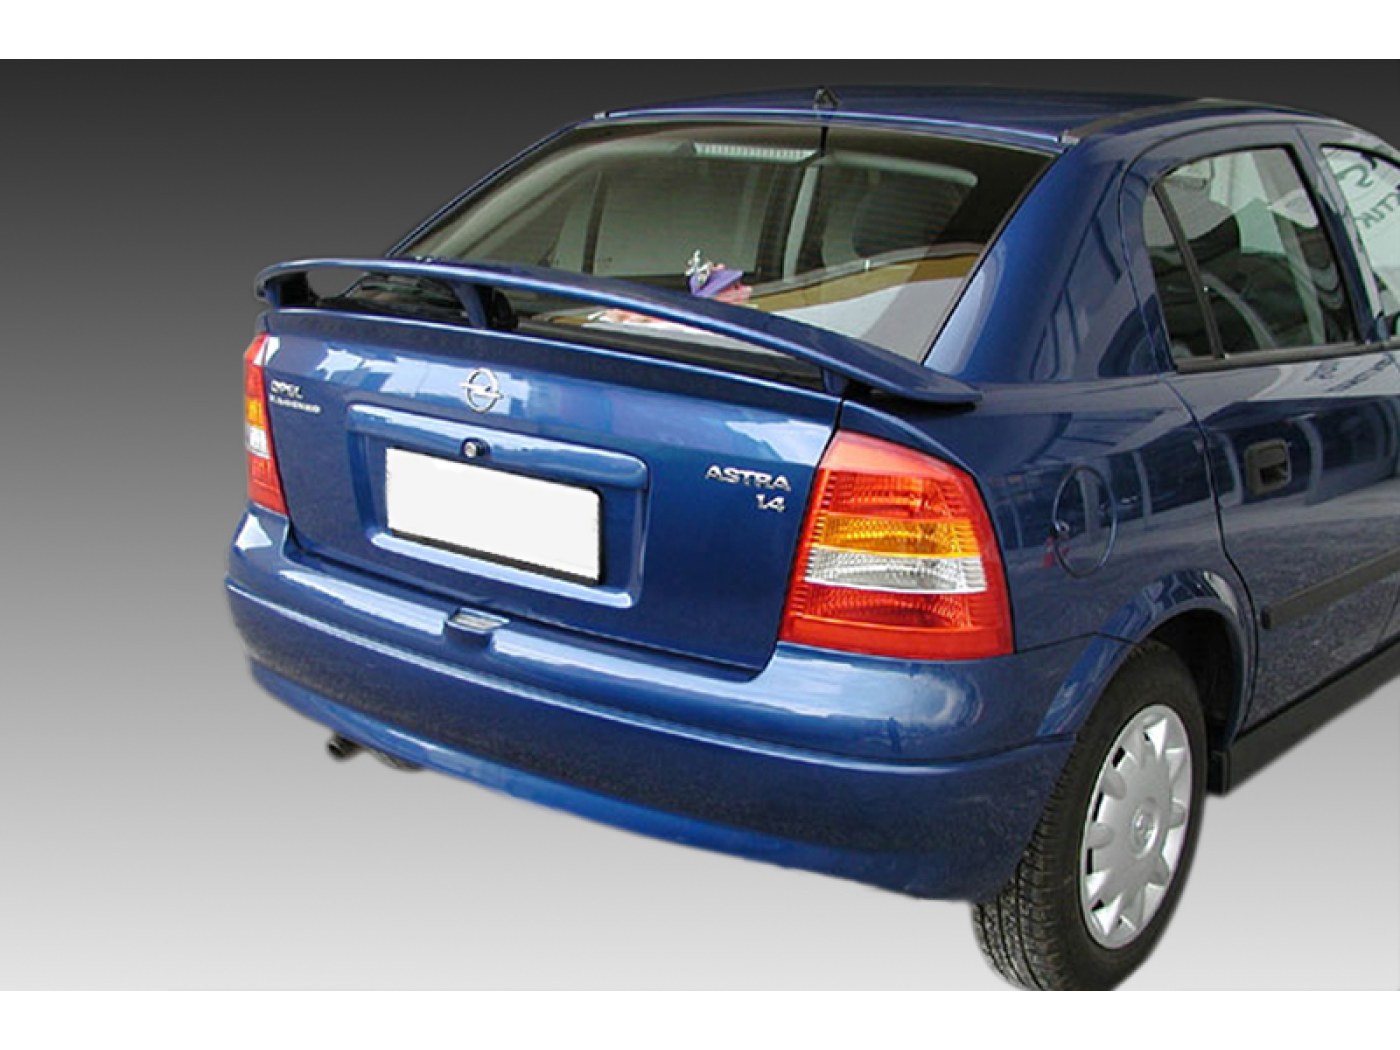 https://www.motordromedesign.com/image/cache/catalog/products/opel/astra_g/boot_spoiler/A-147_1-1400x1050.jpg